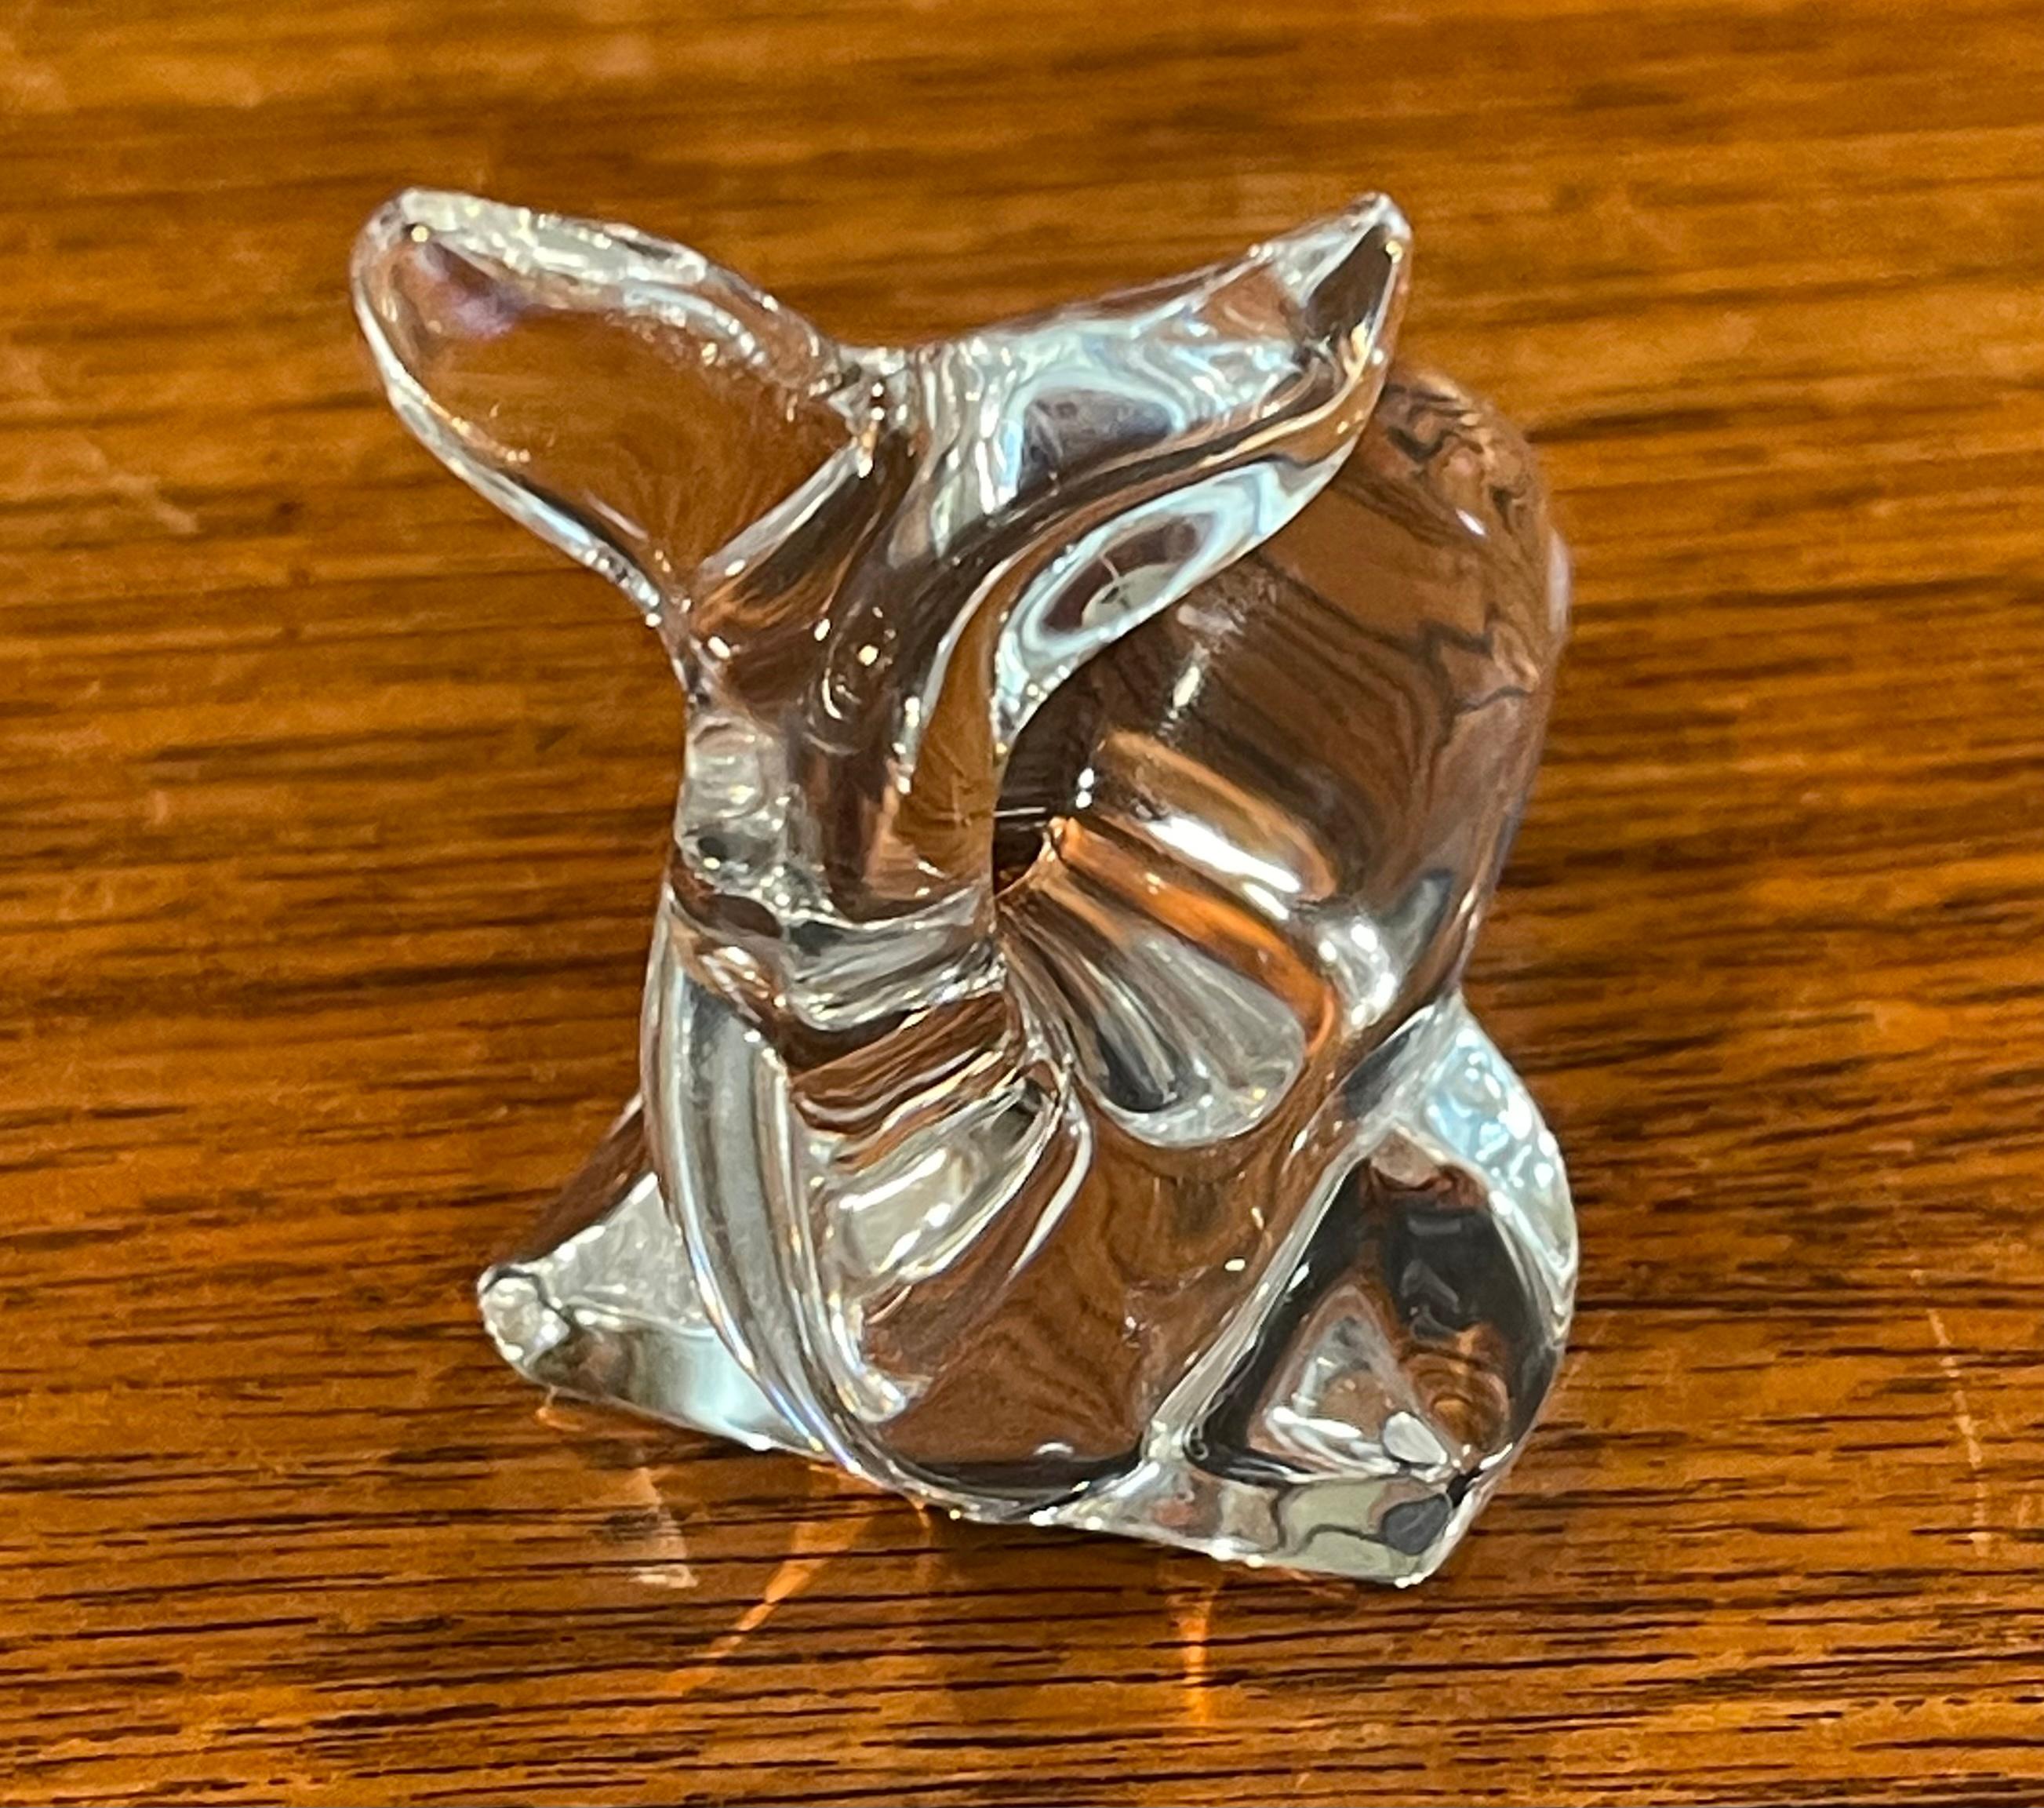 Small Crystal Whale Sculpture / Paperweight by Val St. Lambert for Danbury Mint In Good Condition For Sale In San Diego, CA